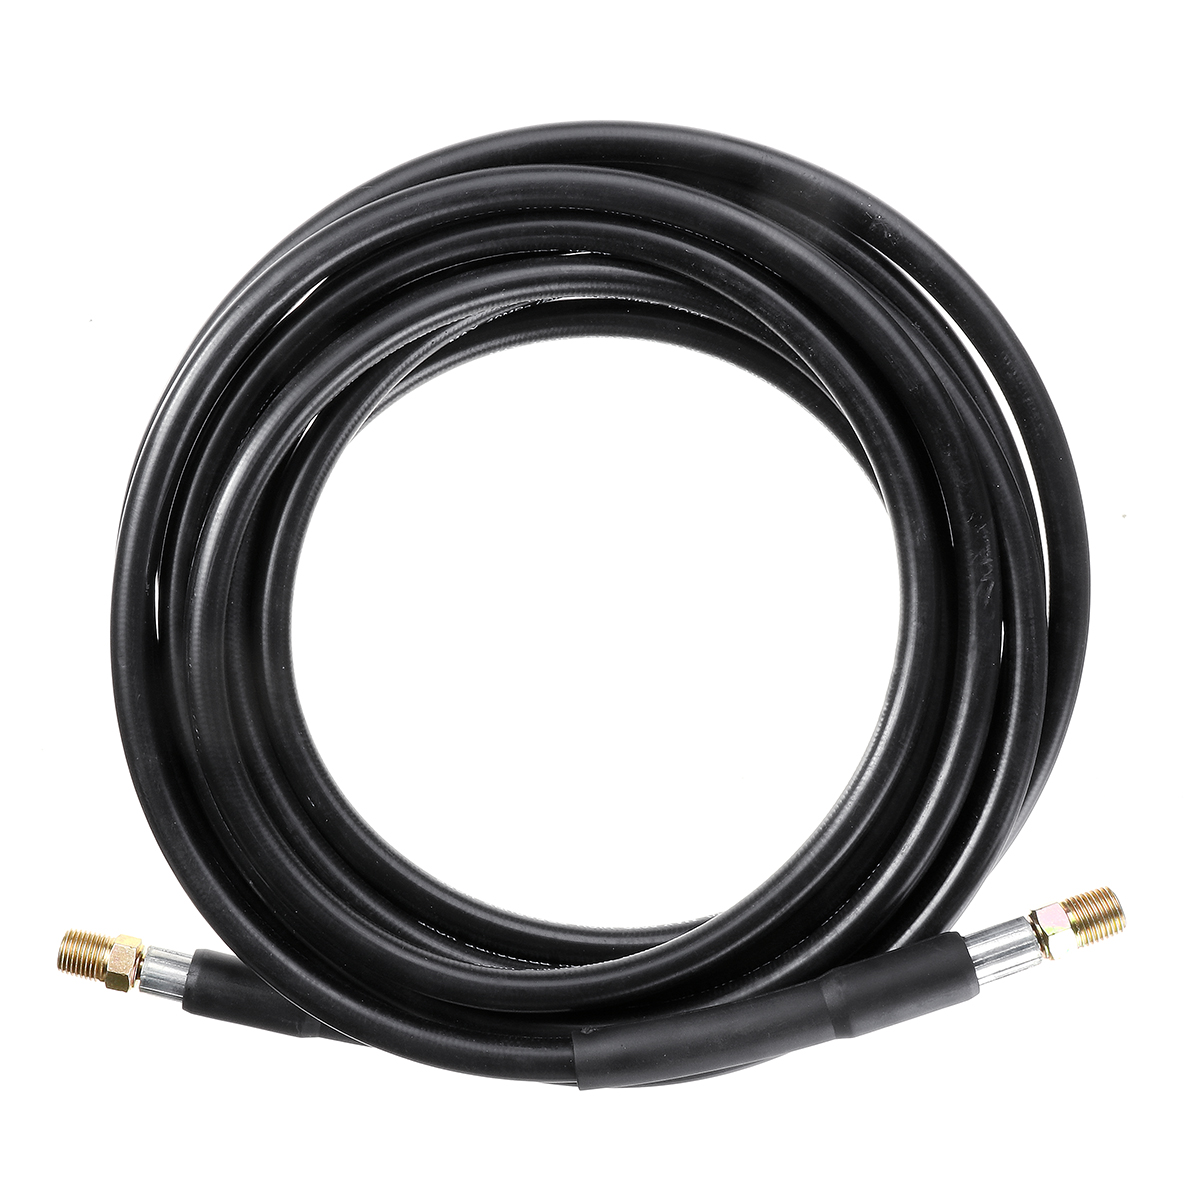 High-Pressure-Washer-Hose-51015202530m-With-4-Connectors-1654762-3